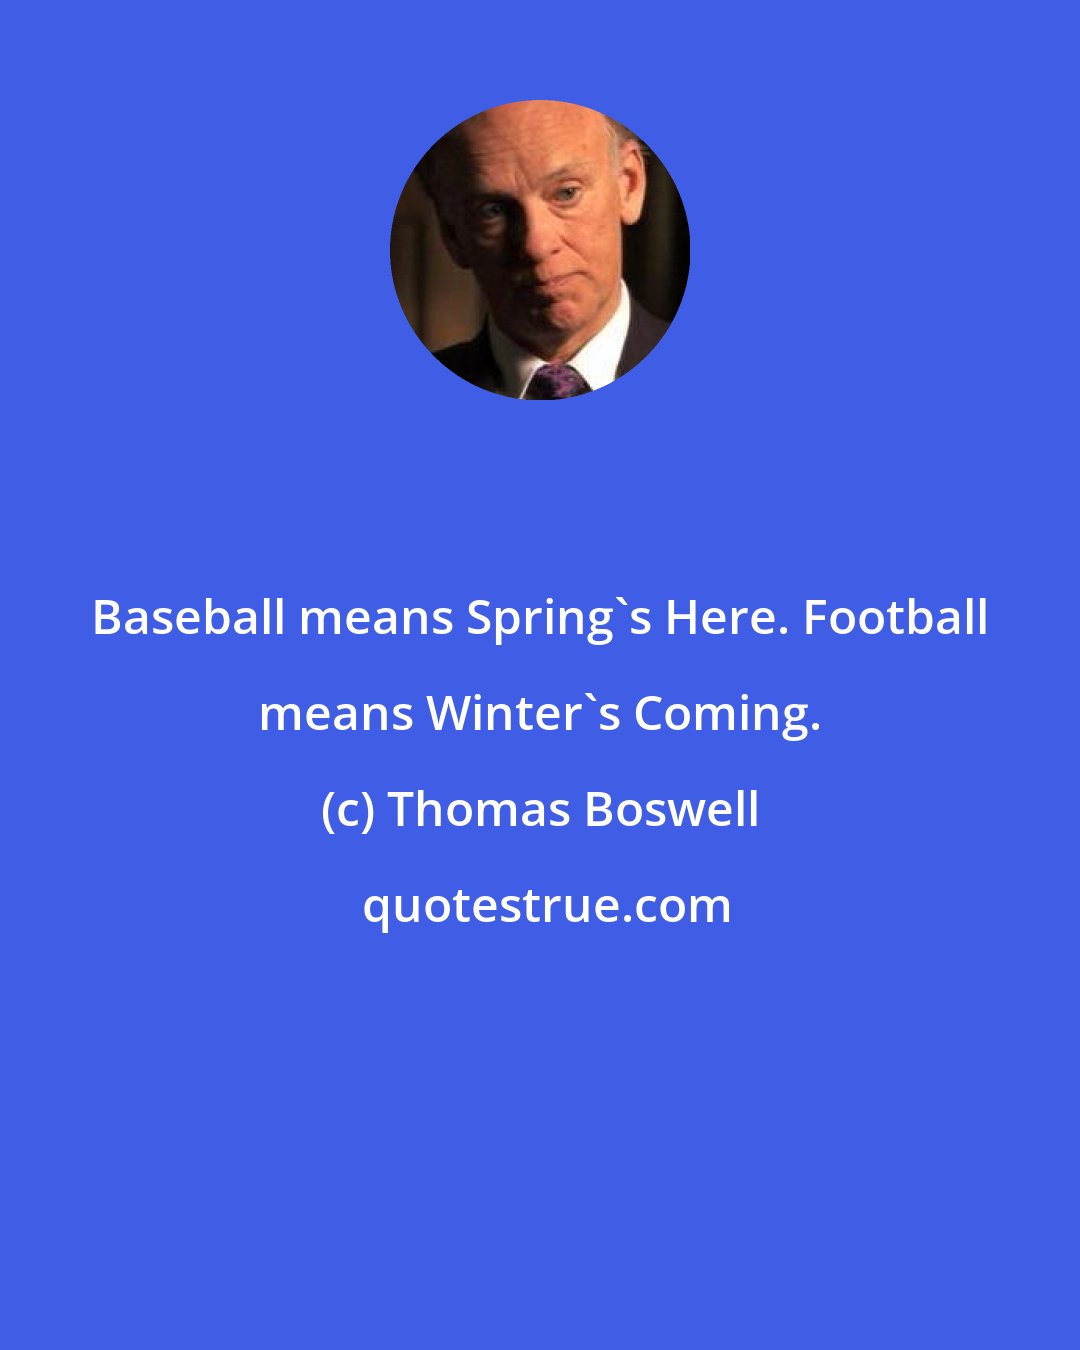 Thomas Boswell: Baseball means Spring's Here. Football means Winter's Coming.